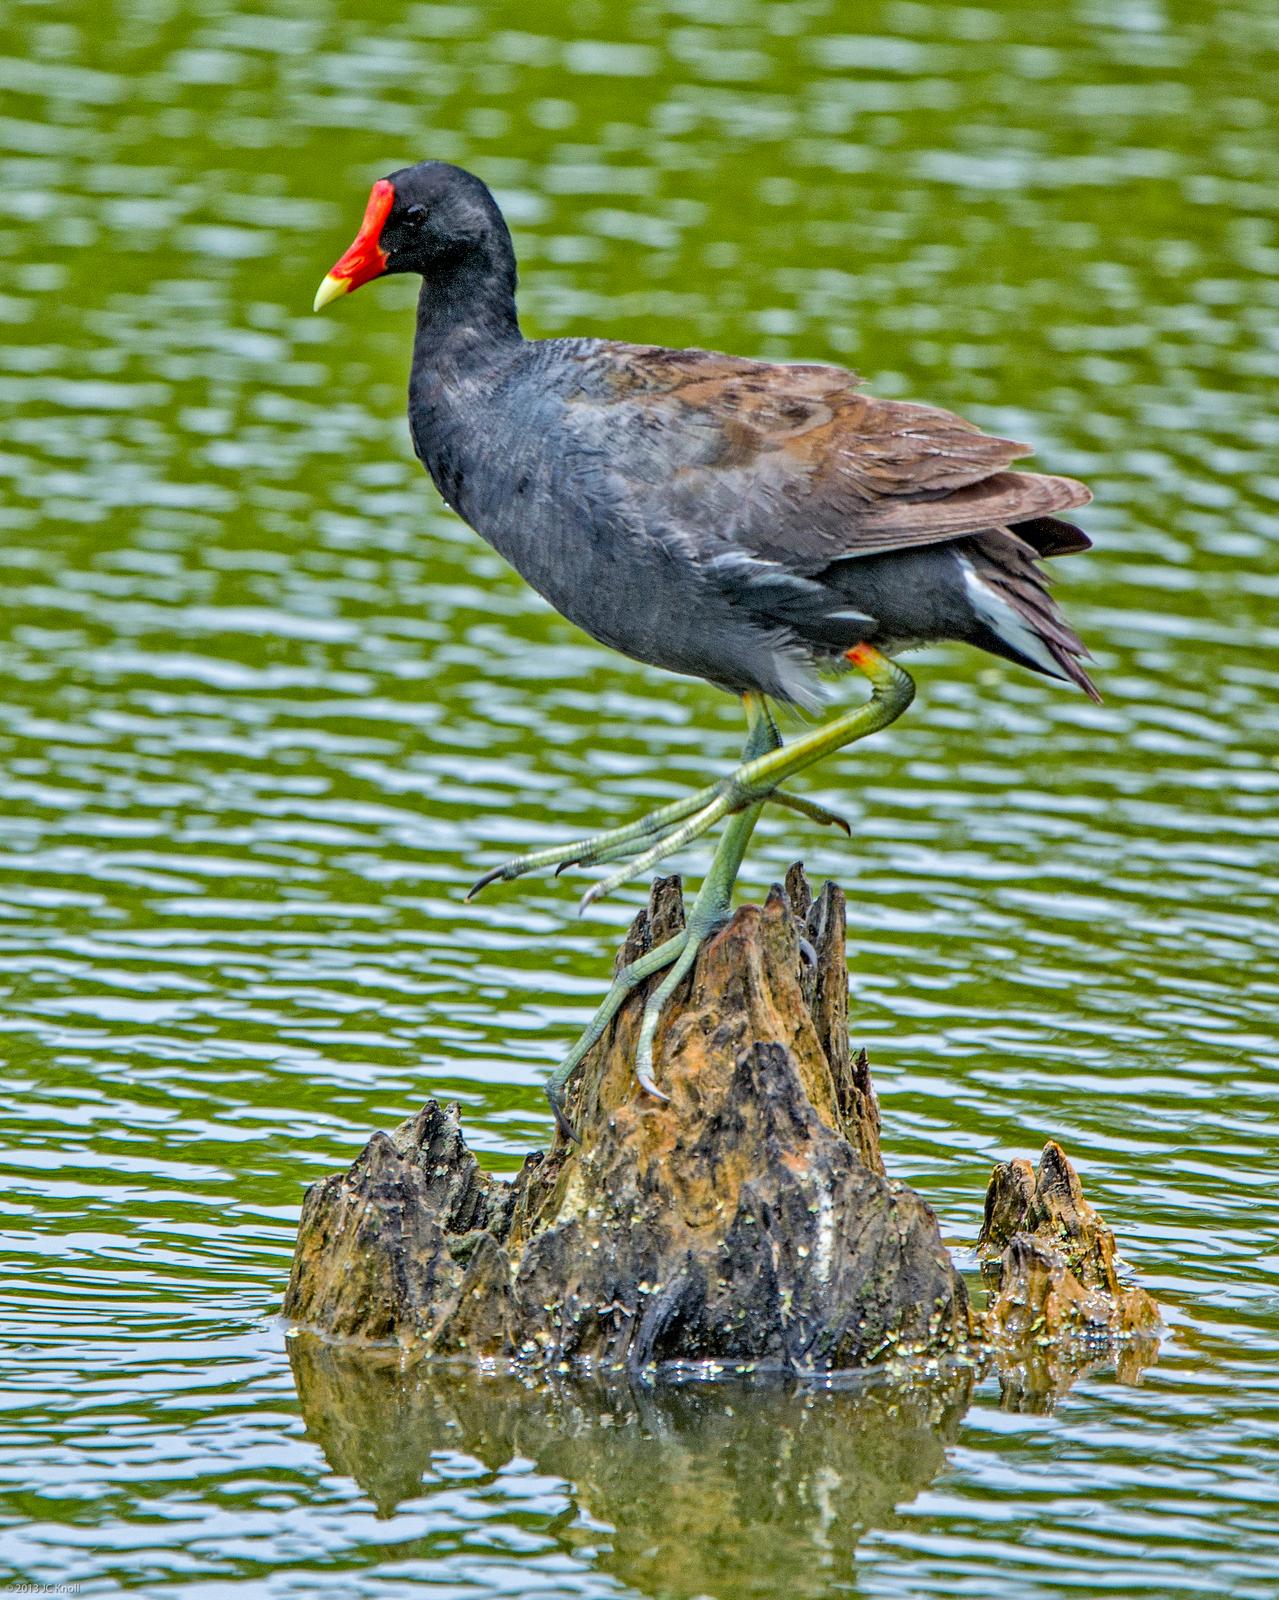 Common Gallinule Photo by JC Knoll